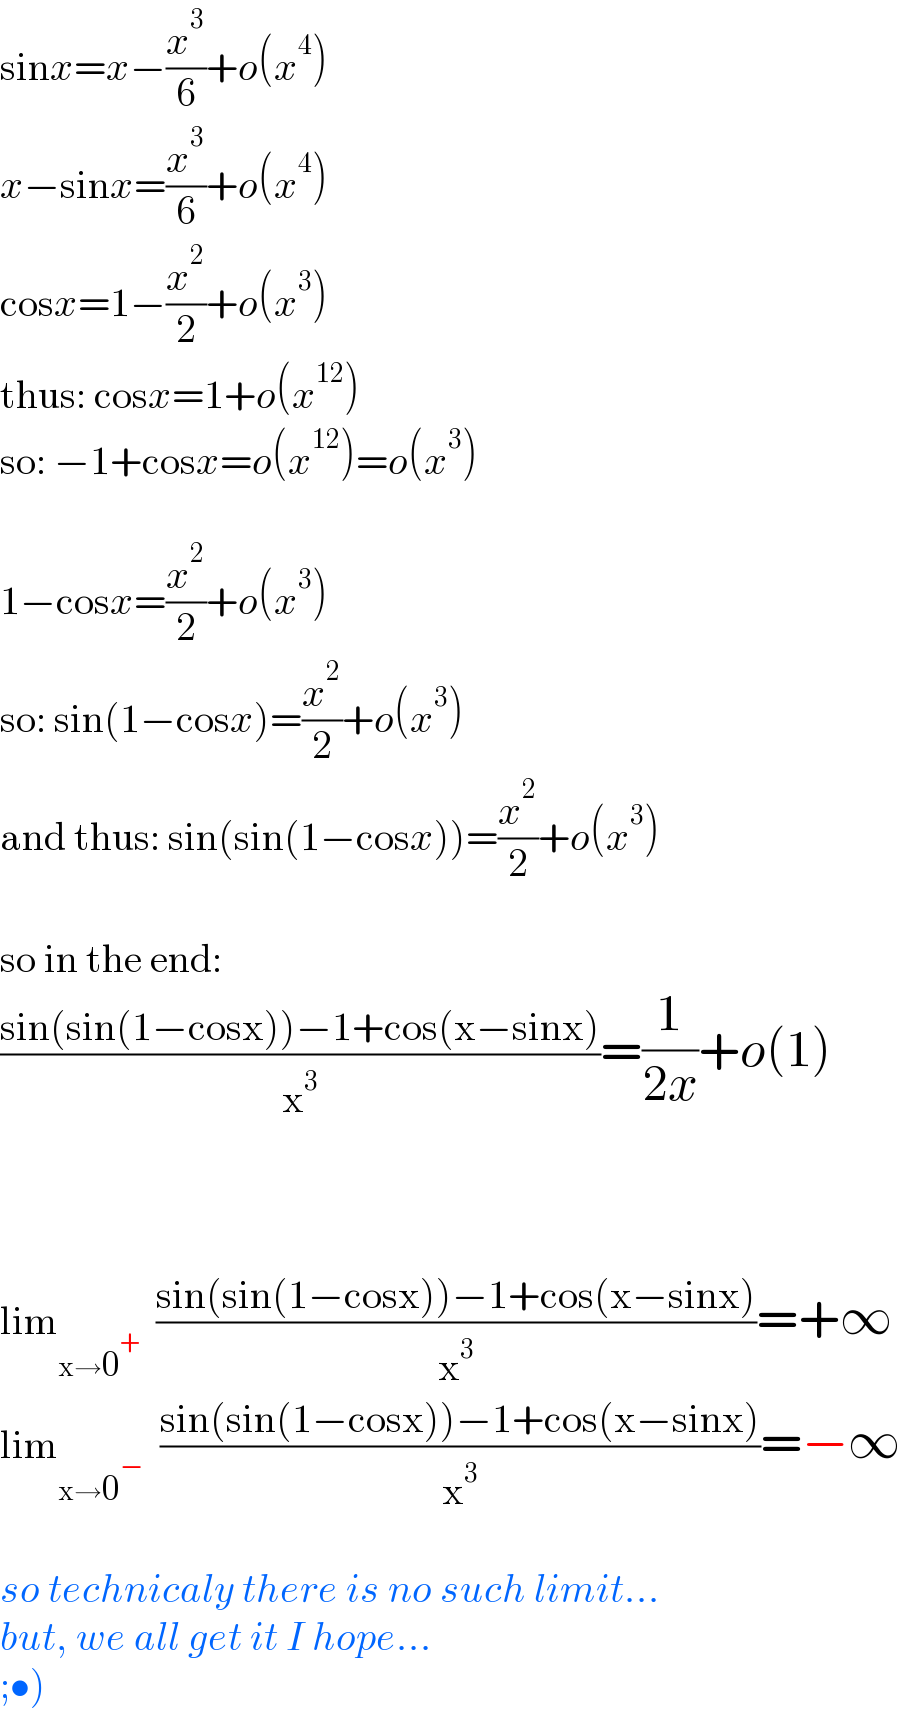 sinx=x−(x^3 /6)+o(x^4 )  x−sinx=(x^3 /6)+o(x^4 )  cosx=1−(x^2 /2)+o(x^3 )  thus: cosx=1+o(x^(12) )  so: −1+cosx=o(x^(12) )=o(x^3 )    1−cosx=(x^2 /2)+o(x^3 )  so: sin(1−cosx)=(x^2 /2)+o(x^3 )  and thus: sin(sin(1−cosx))=(x^2 /2)+o(x^3 )    so in the end:  ((sin(sin(1−cosx))−1+cos(x−sinx))/x^3 )=(1/(2x))+o(1)        lim_(x→0^+ )   ((sin(sin(1−cosx))−1+cos(x−sinx))/x^3 )=+∞  lim_(x→0^− )   ((sin(sin(1−cosx))−1+cos(x−sinx))/x^3 )=−∞    so technicaly there is no such limit...  but, we all get it I hope...  ;•)  